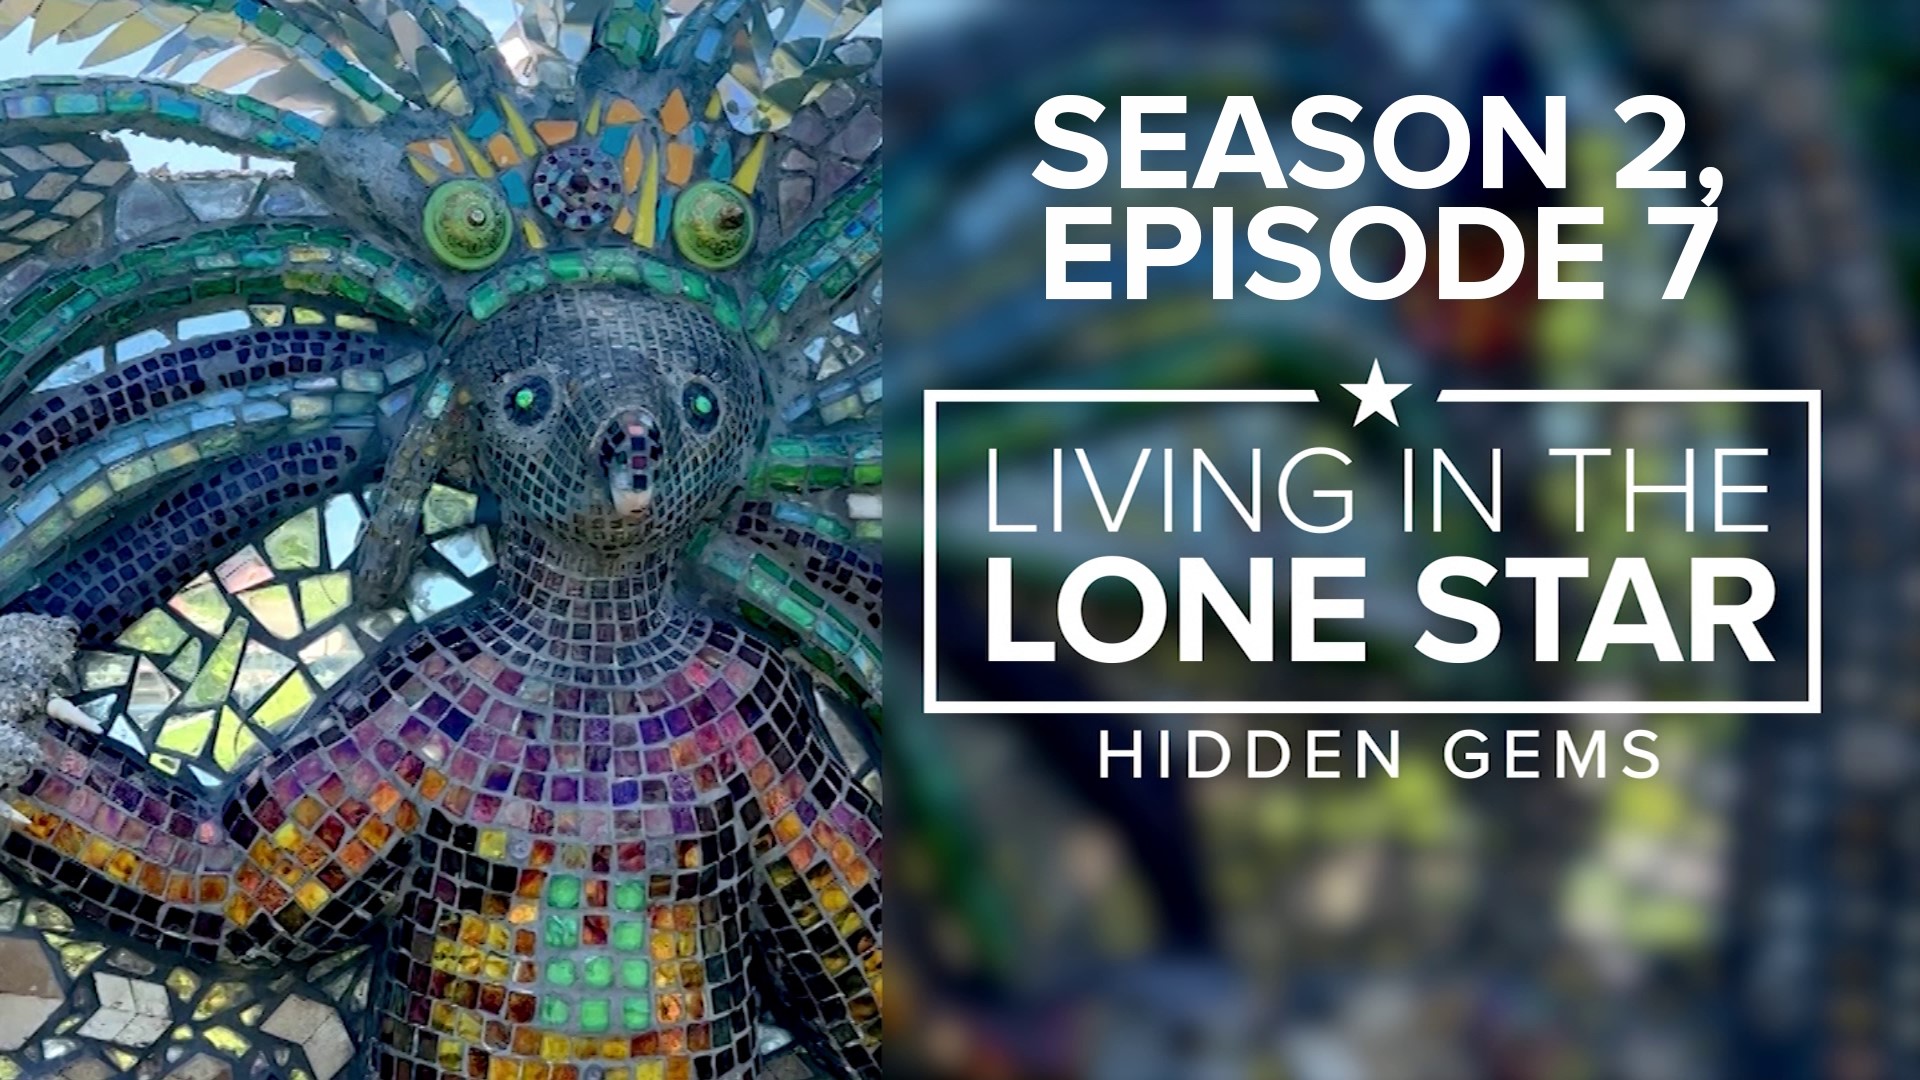 You can find beauty all around the Houston area, especially in unexpected spots like unusual canvases, old architecture and more. See for yourself in this episode!